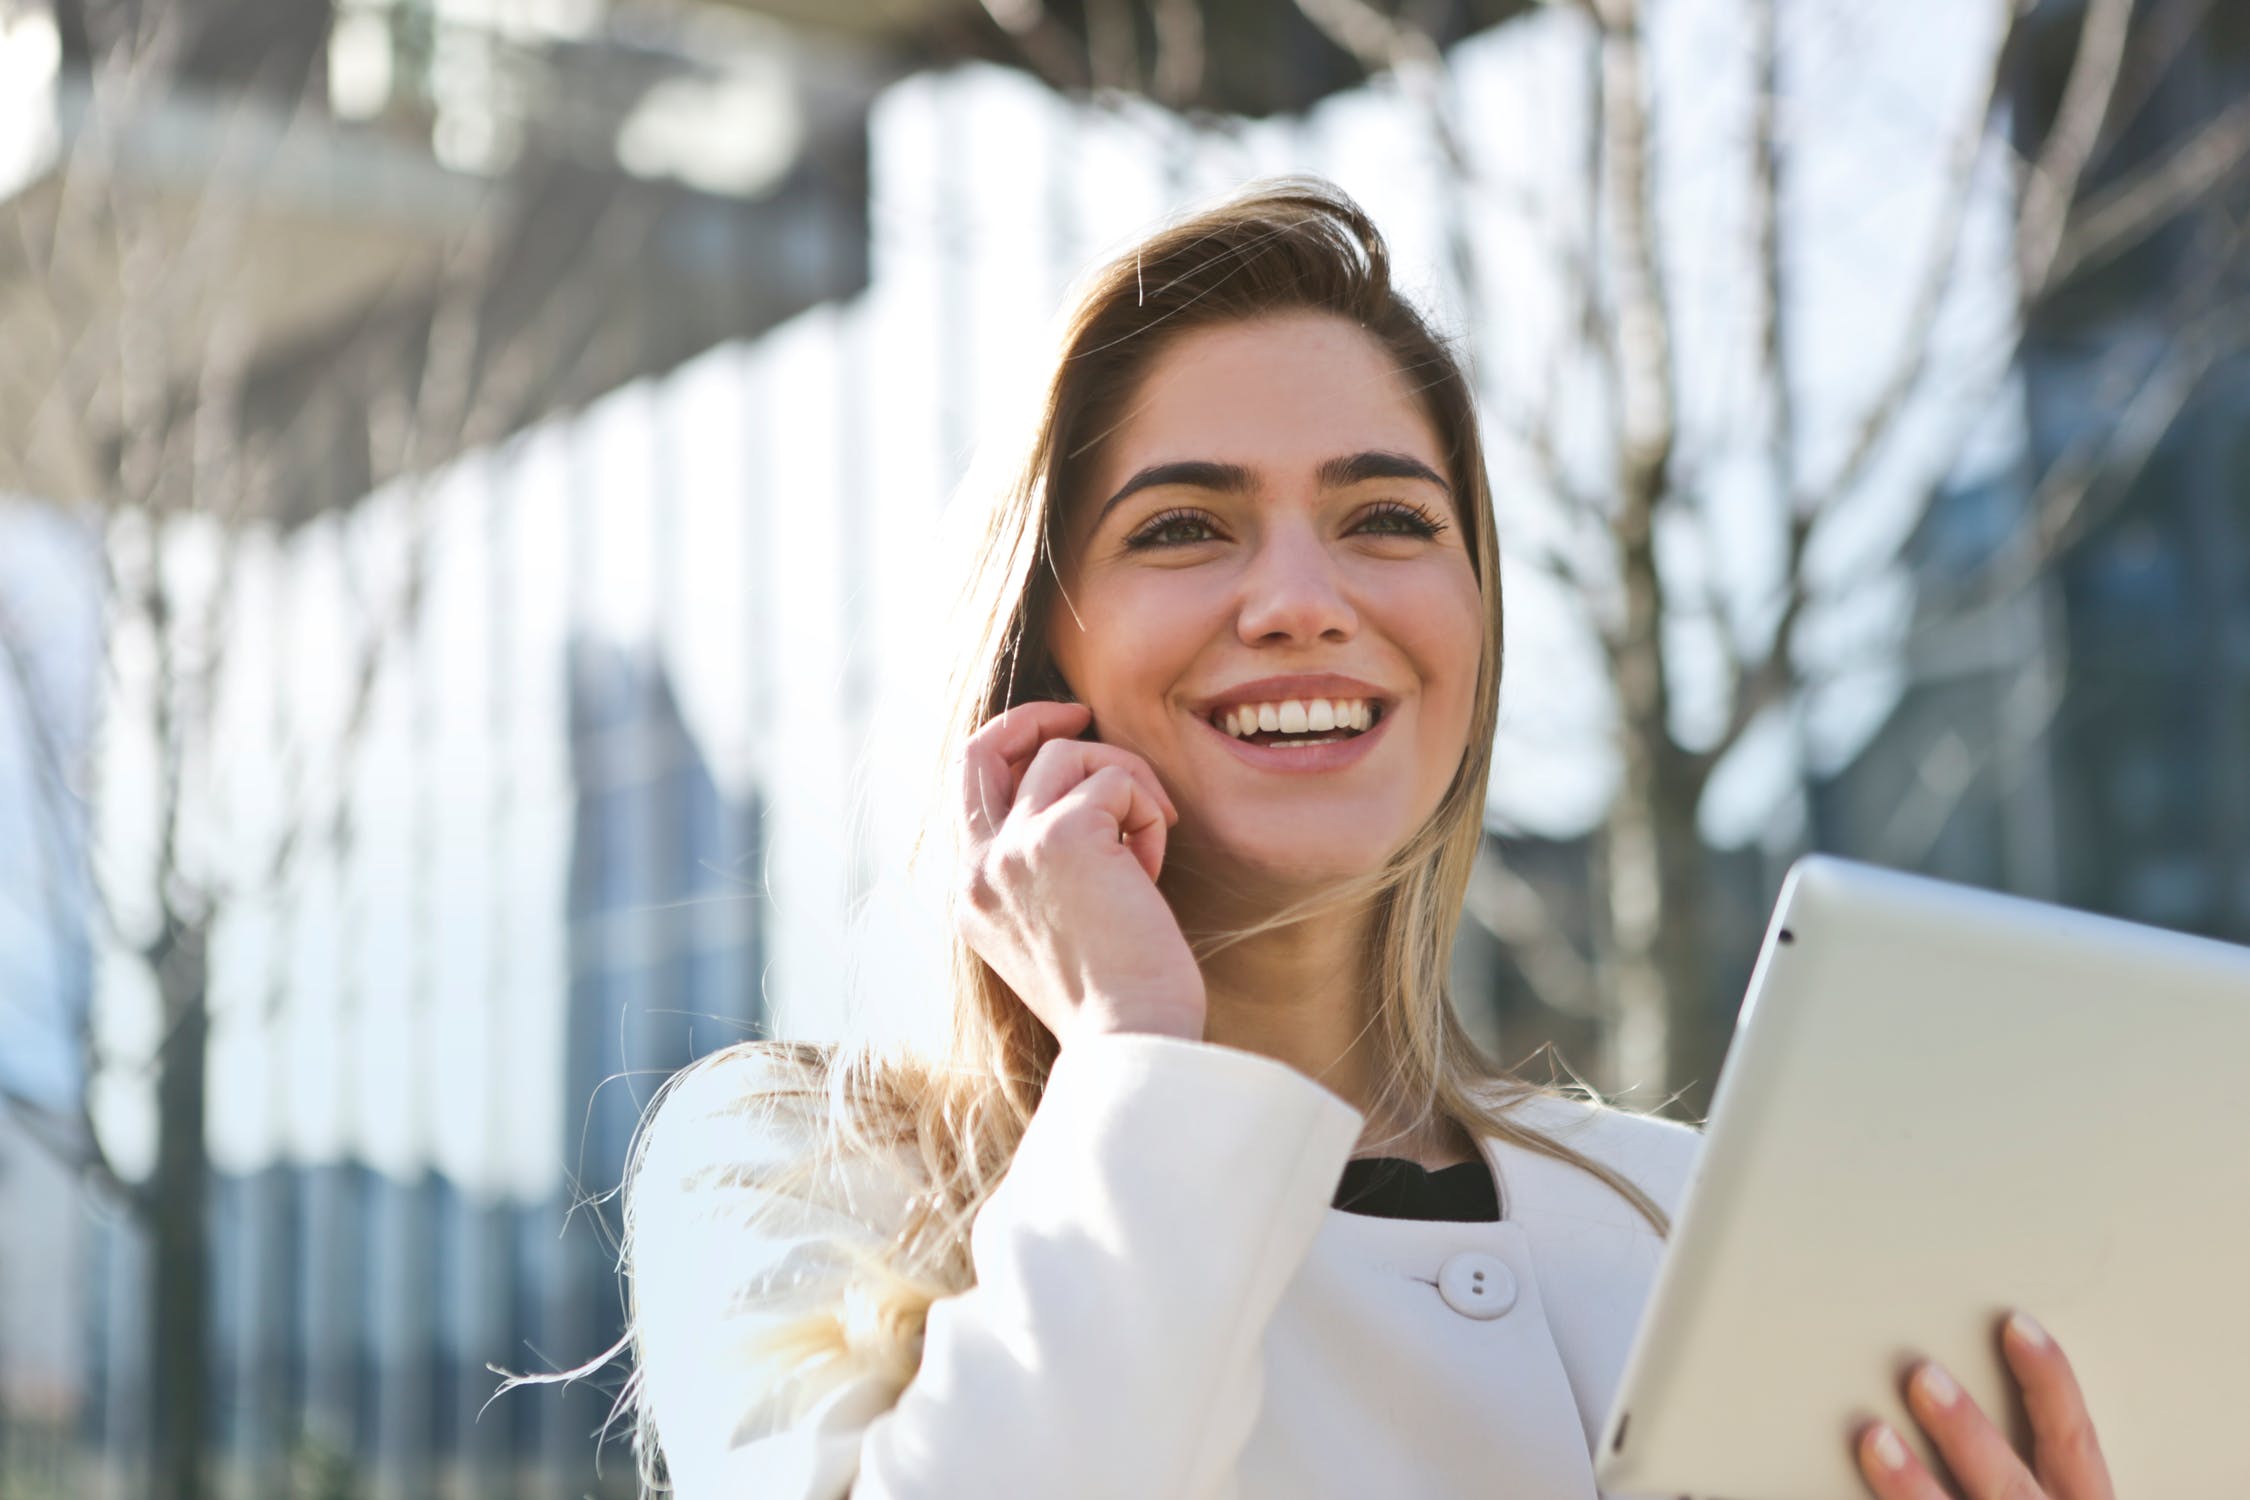 a white woman smiling outside on the phone wearing a white business suit holding a tablet